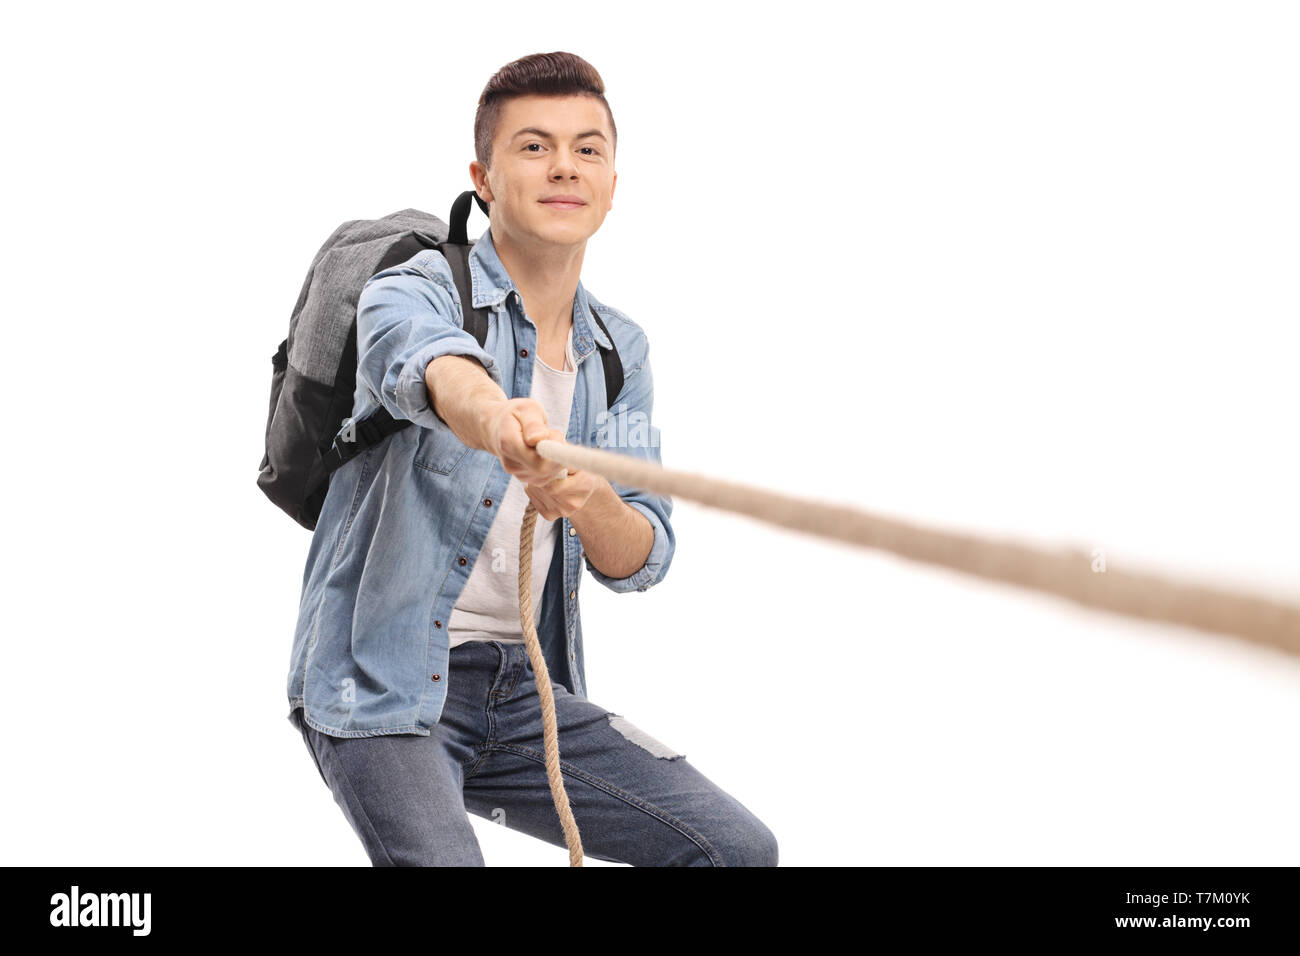 Male student pulling a rope isolated on white background Stock Photo